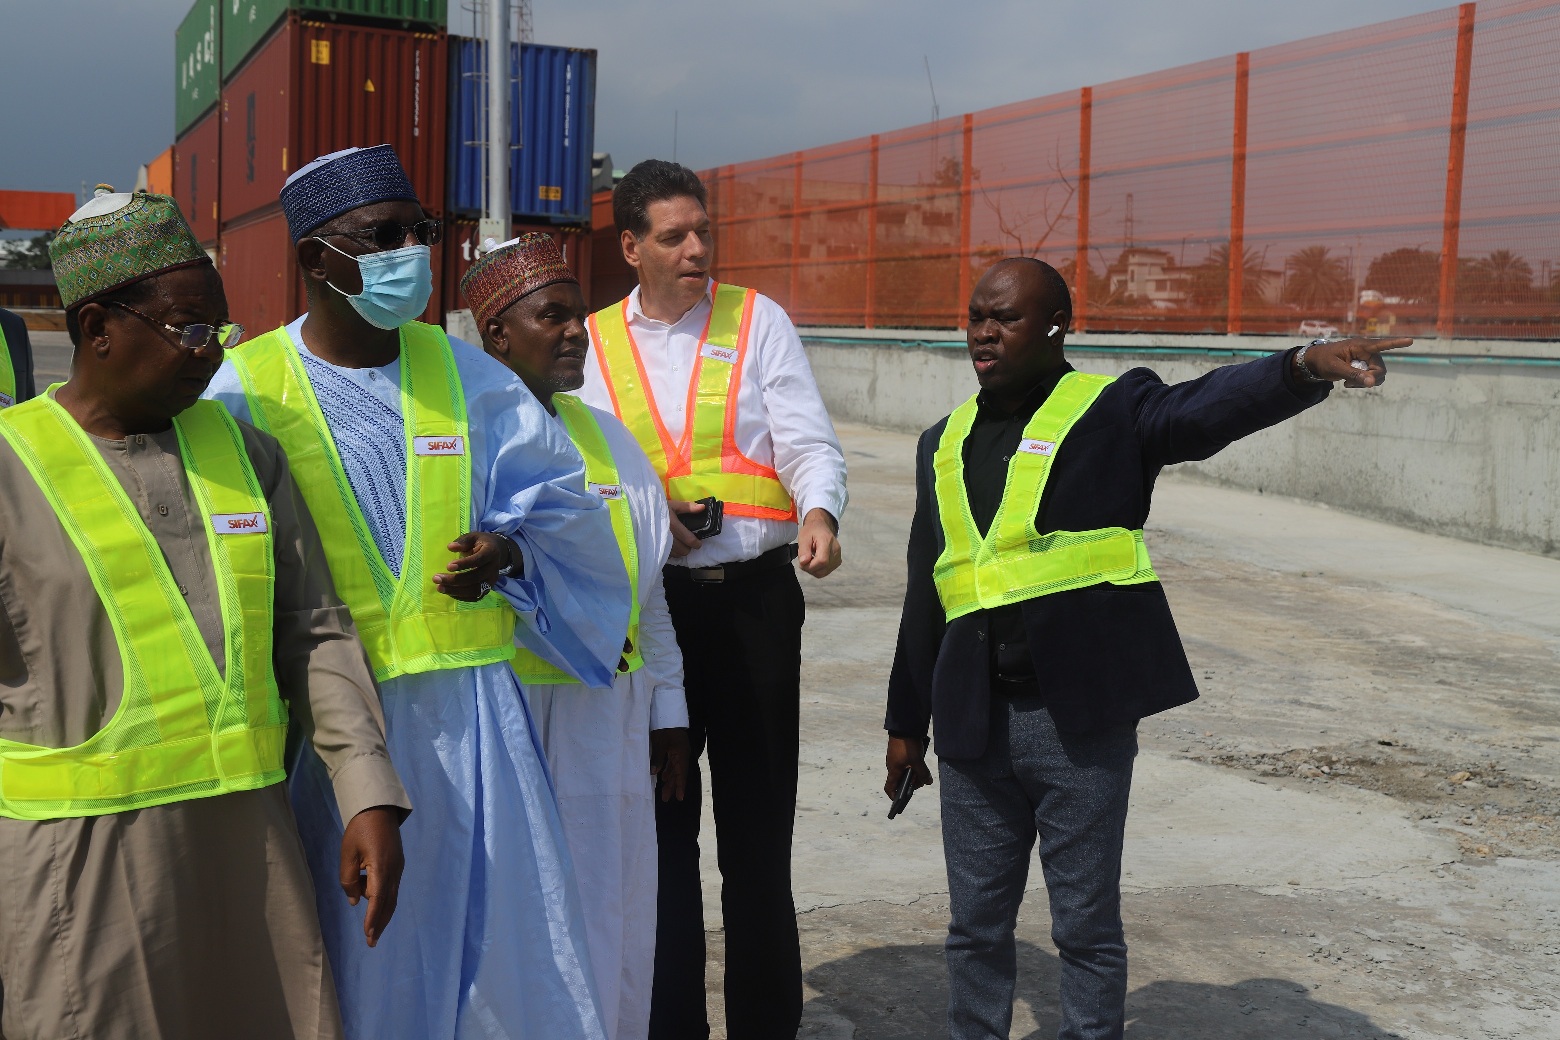 R-L: Victor Olotu, Group Head, Business Development, SIFAX Group explaining the SIFAX Container Terminal, Ijora Causeway layout to the Dala Inland Dry Port Team. With him is Paul Linden, Managing Director, SIFAX Container Terminal; Ahmad Rabiu, Managing Director, Dala Inland Dry Port, Kano State; Abubakar Sahabo Bawuro, Chairman/CEO, Dala Inland Dry Port, Kano State and Yakubu Tsalhatu Jumare, Head of Operations, Dala Inland Dry Port, Kano State.